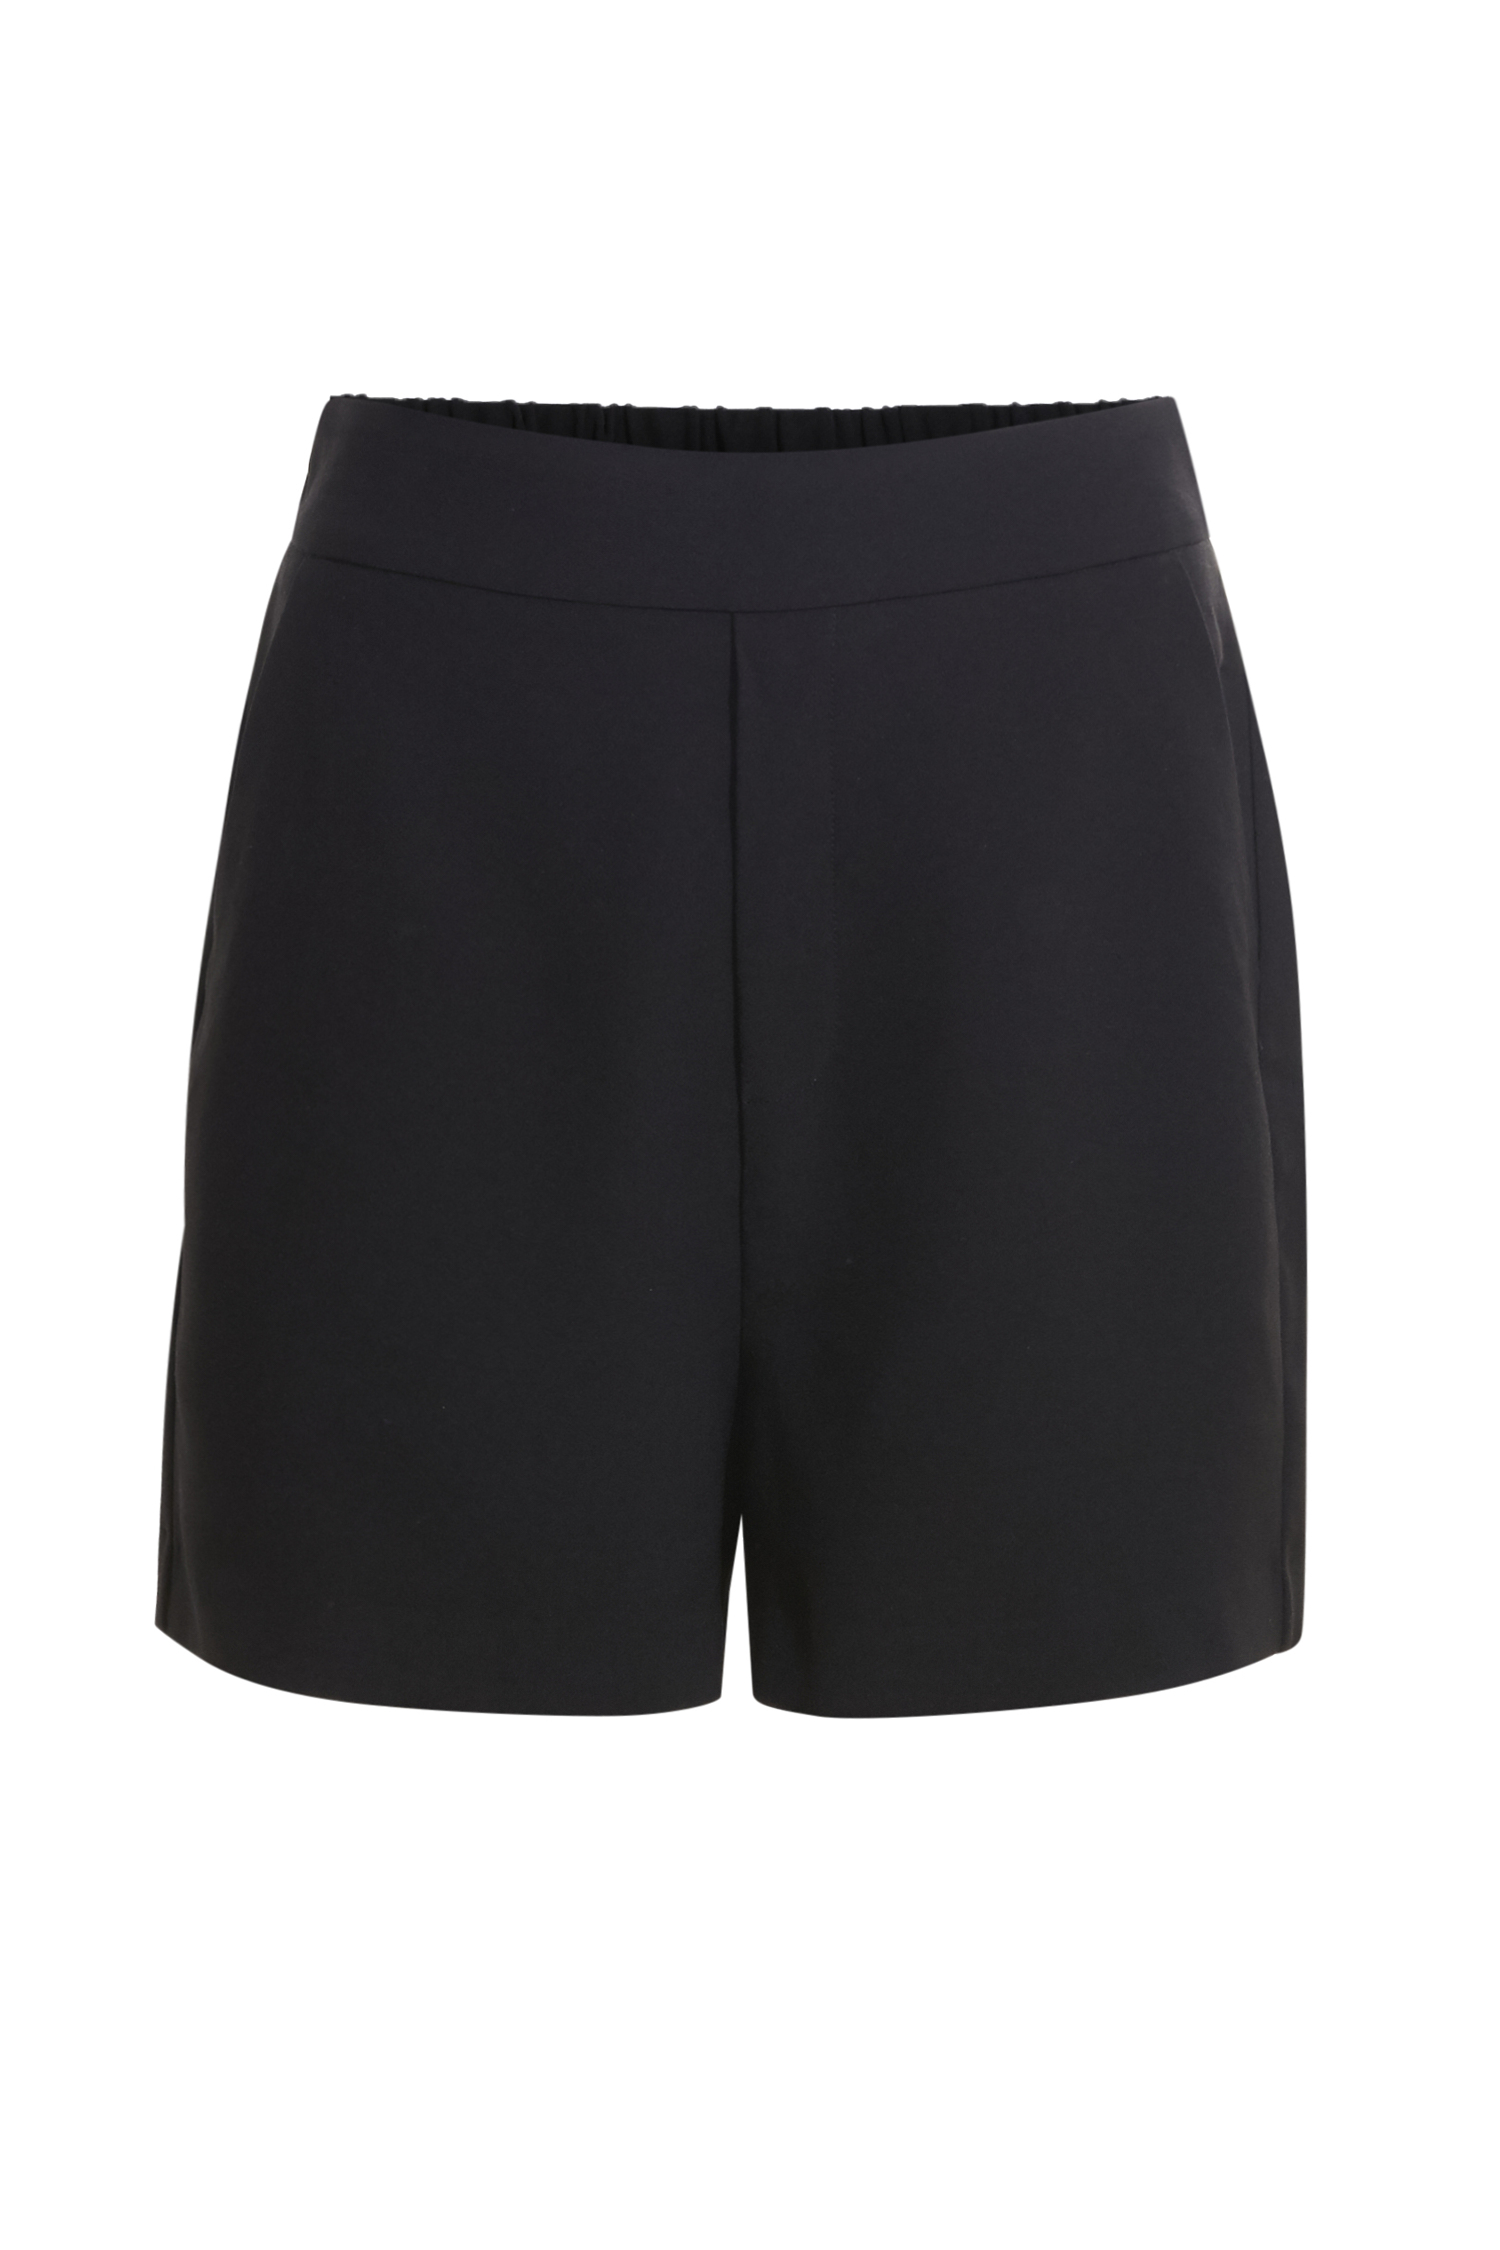 Skies are Blue Elastic Trouser Shorts